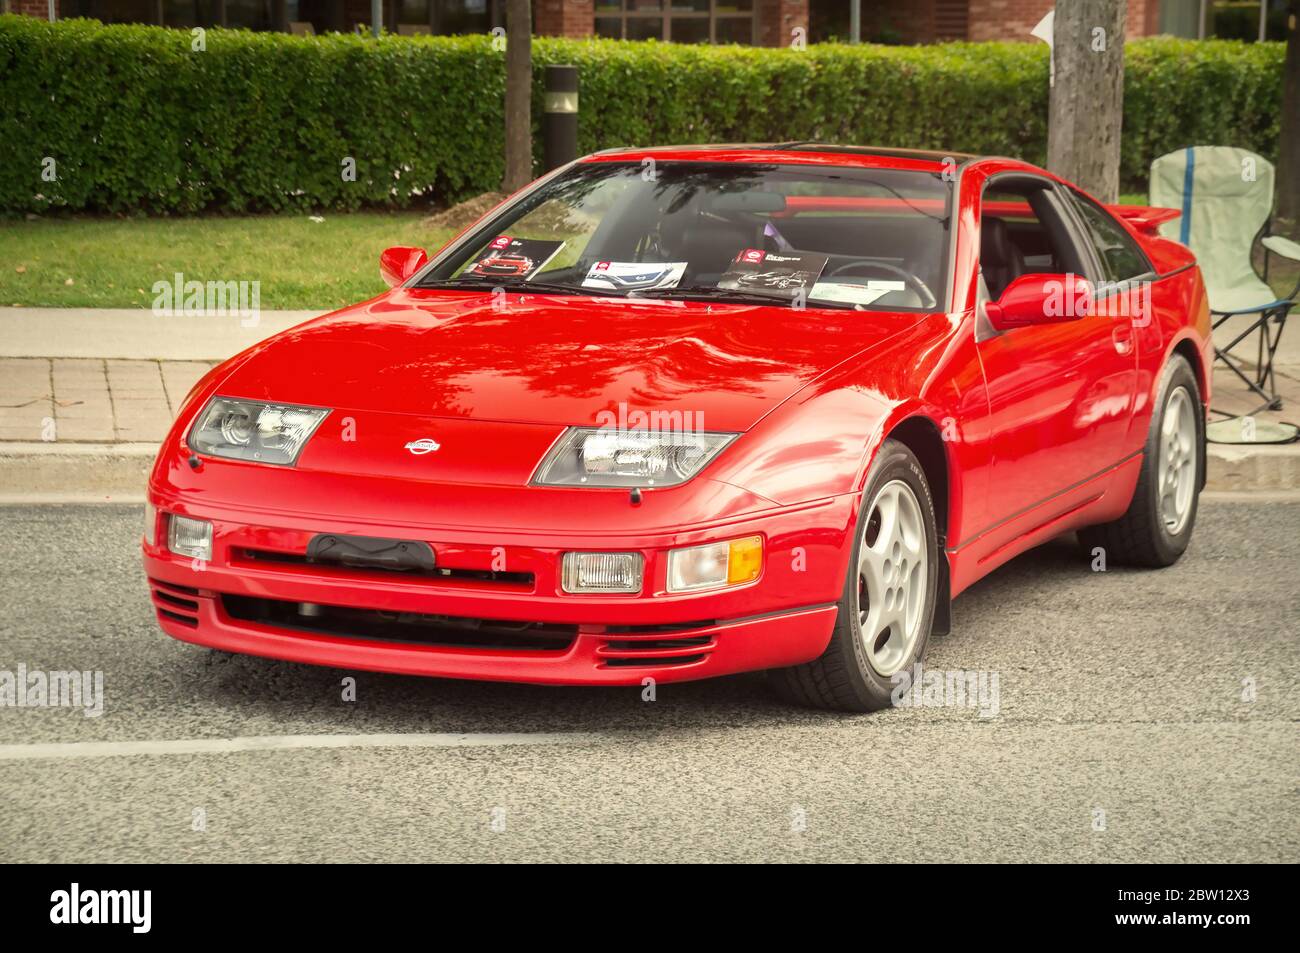 TORONTO, CANADA - 08 18 2018: 1990 Nissan 300ZX Z32 coupe oldtimer sports car made by Japanese automaker Nissan Motor Co., Ltd on display at auto show Stock Photo